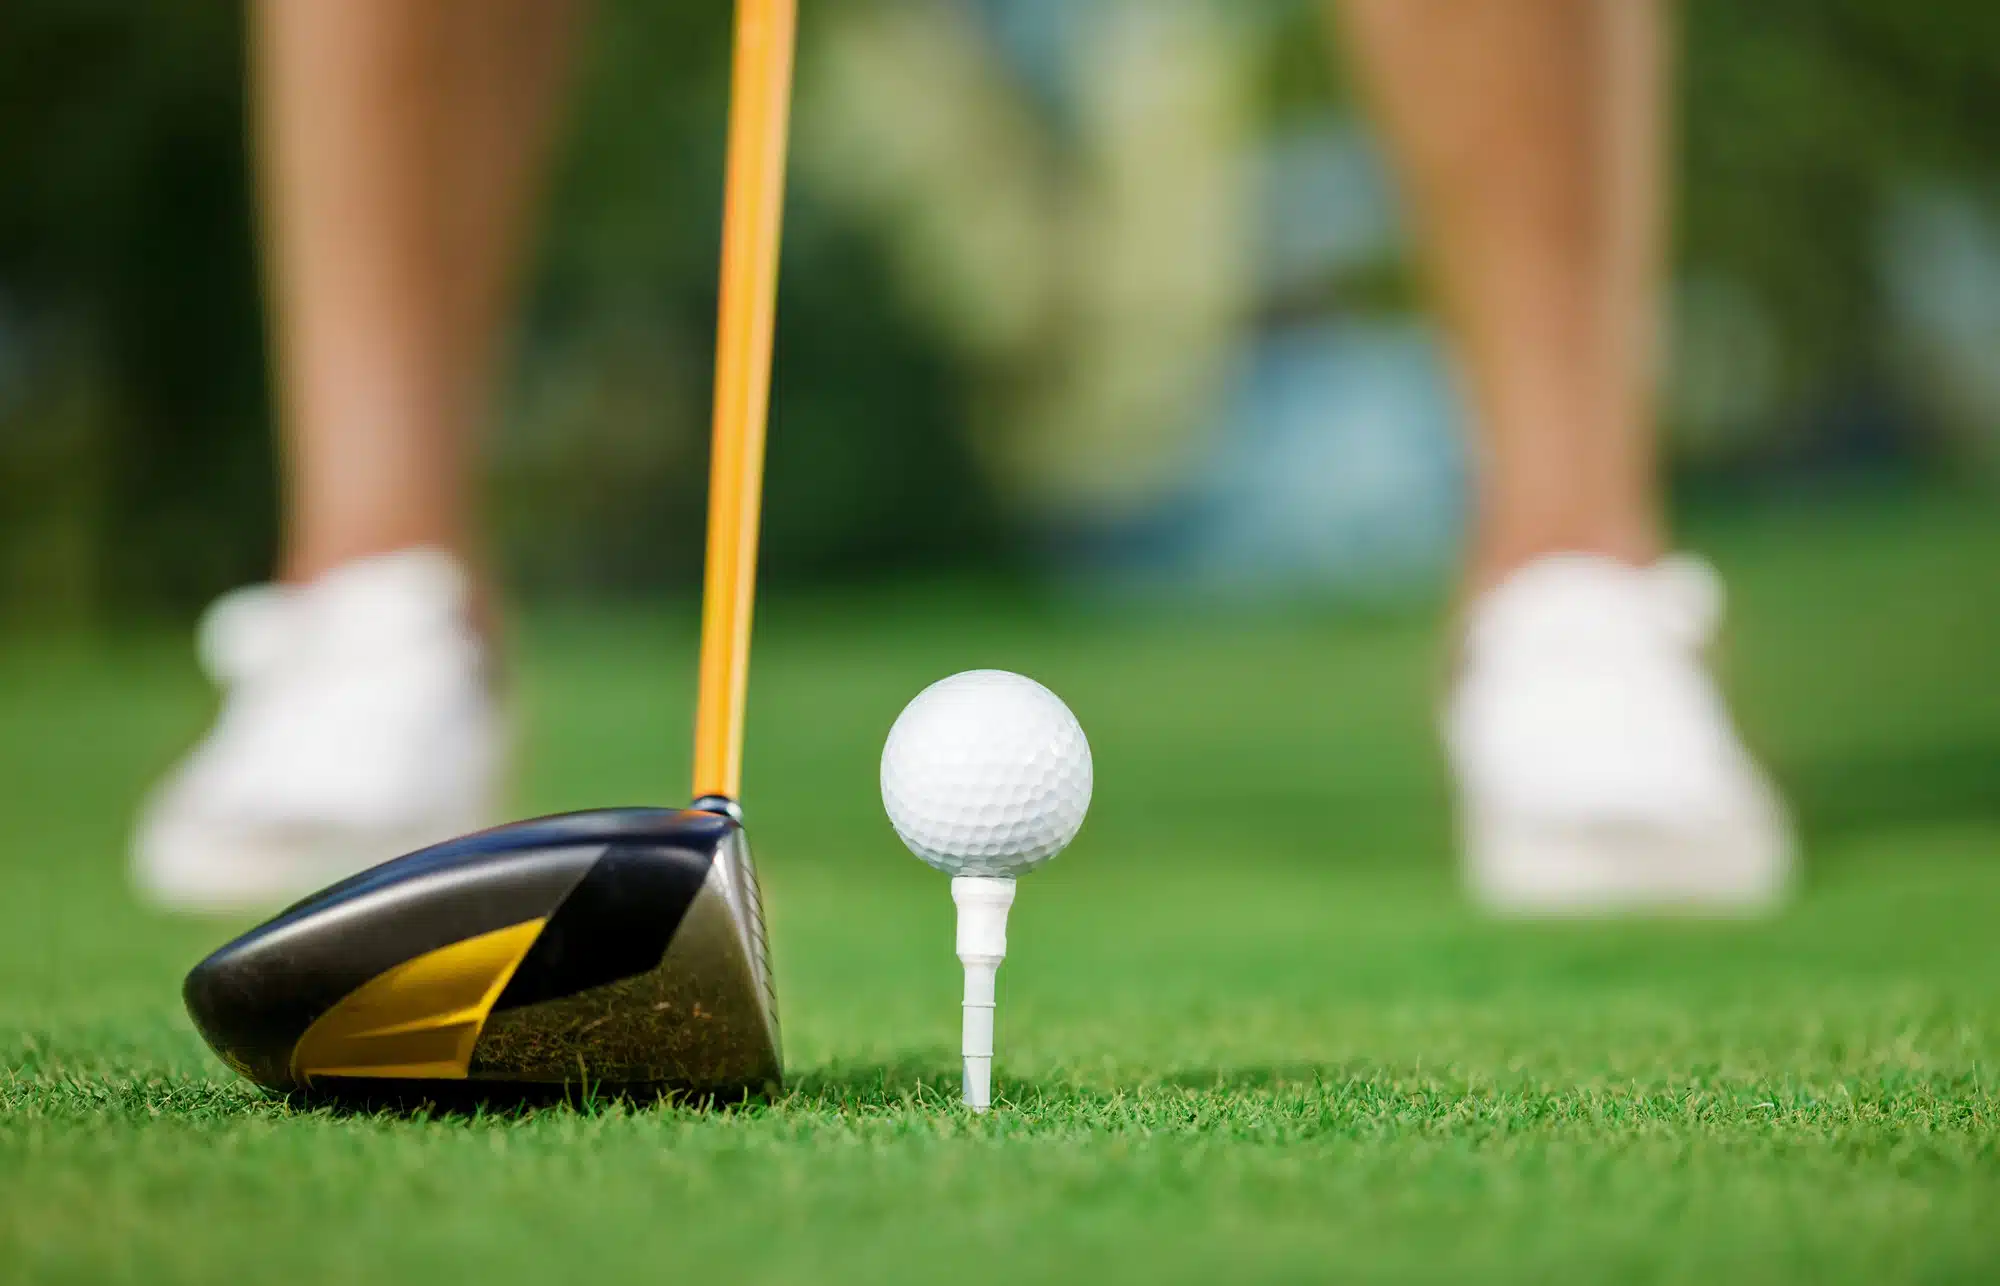 Close-up of a driver golf club next to a golf ball on a tee on a green